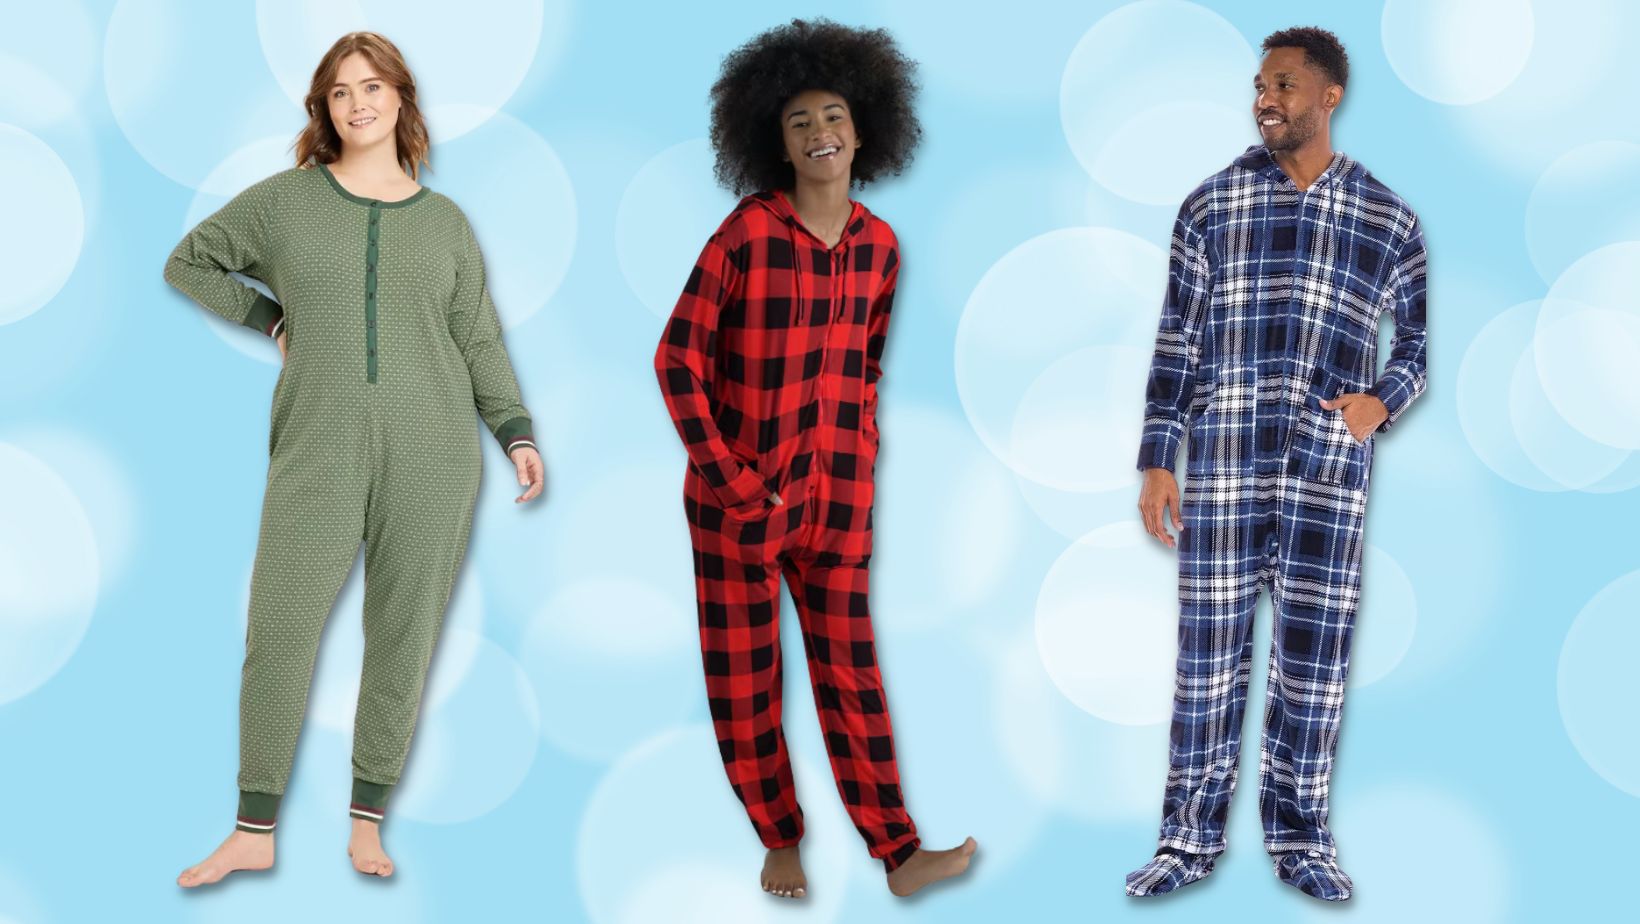 Can a flannel nightgown make this winter bearable?